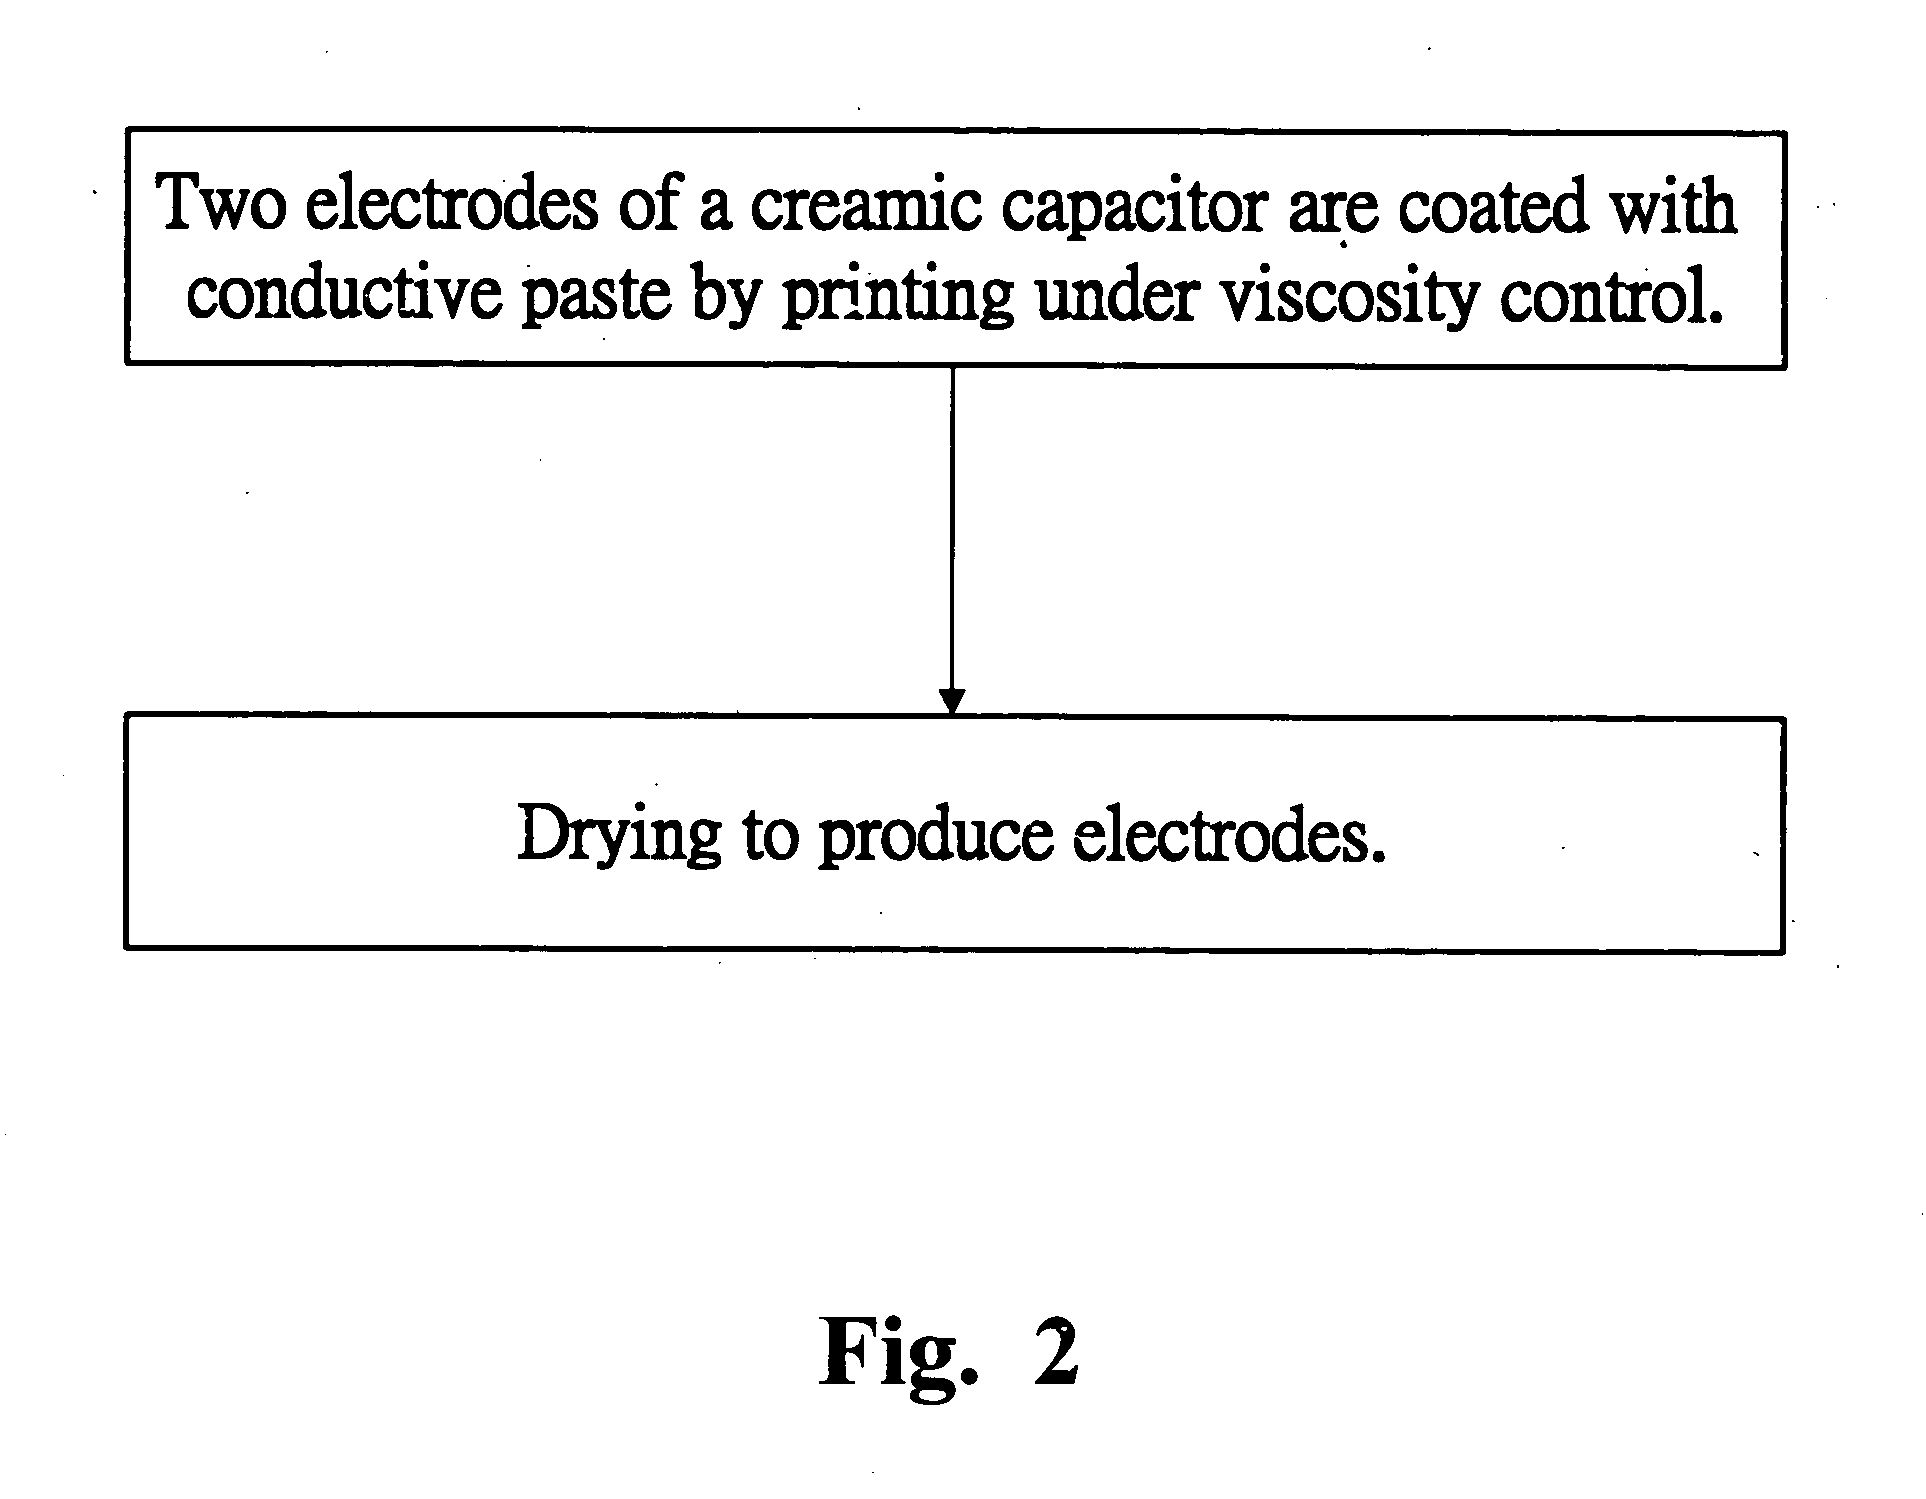 Manufacturing method for electrodes that inhibit corona effect on ceramic capacitor